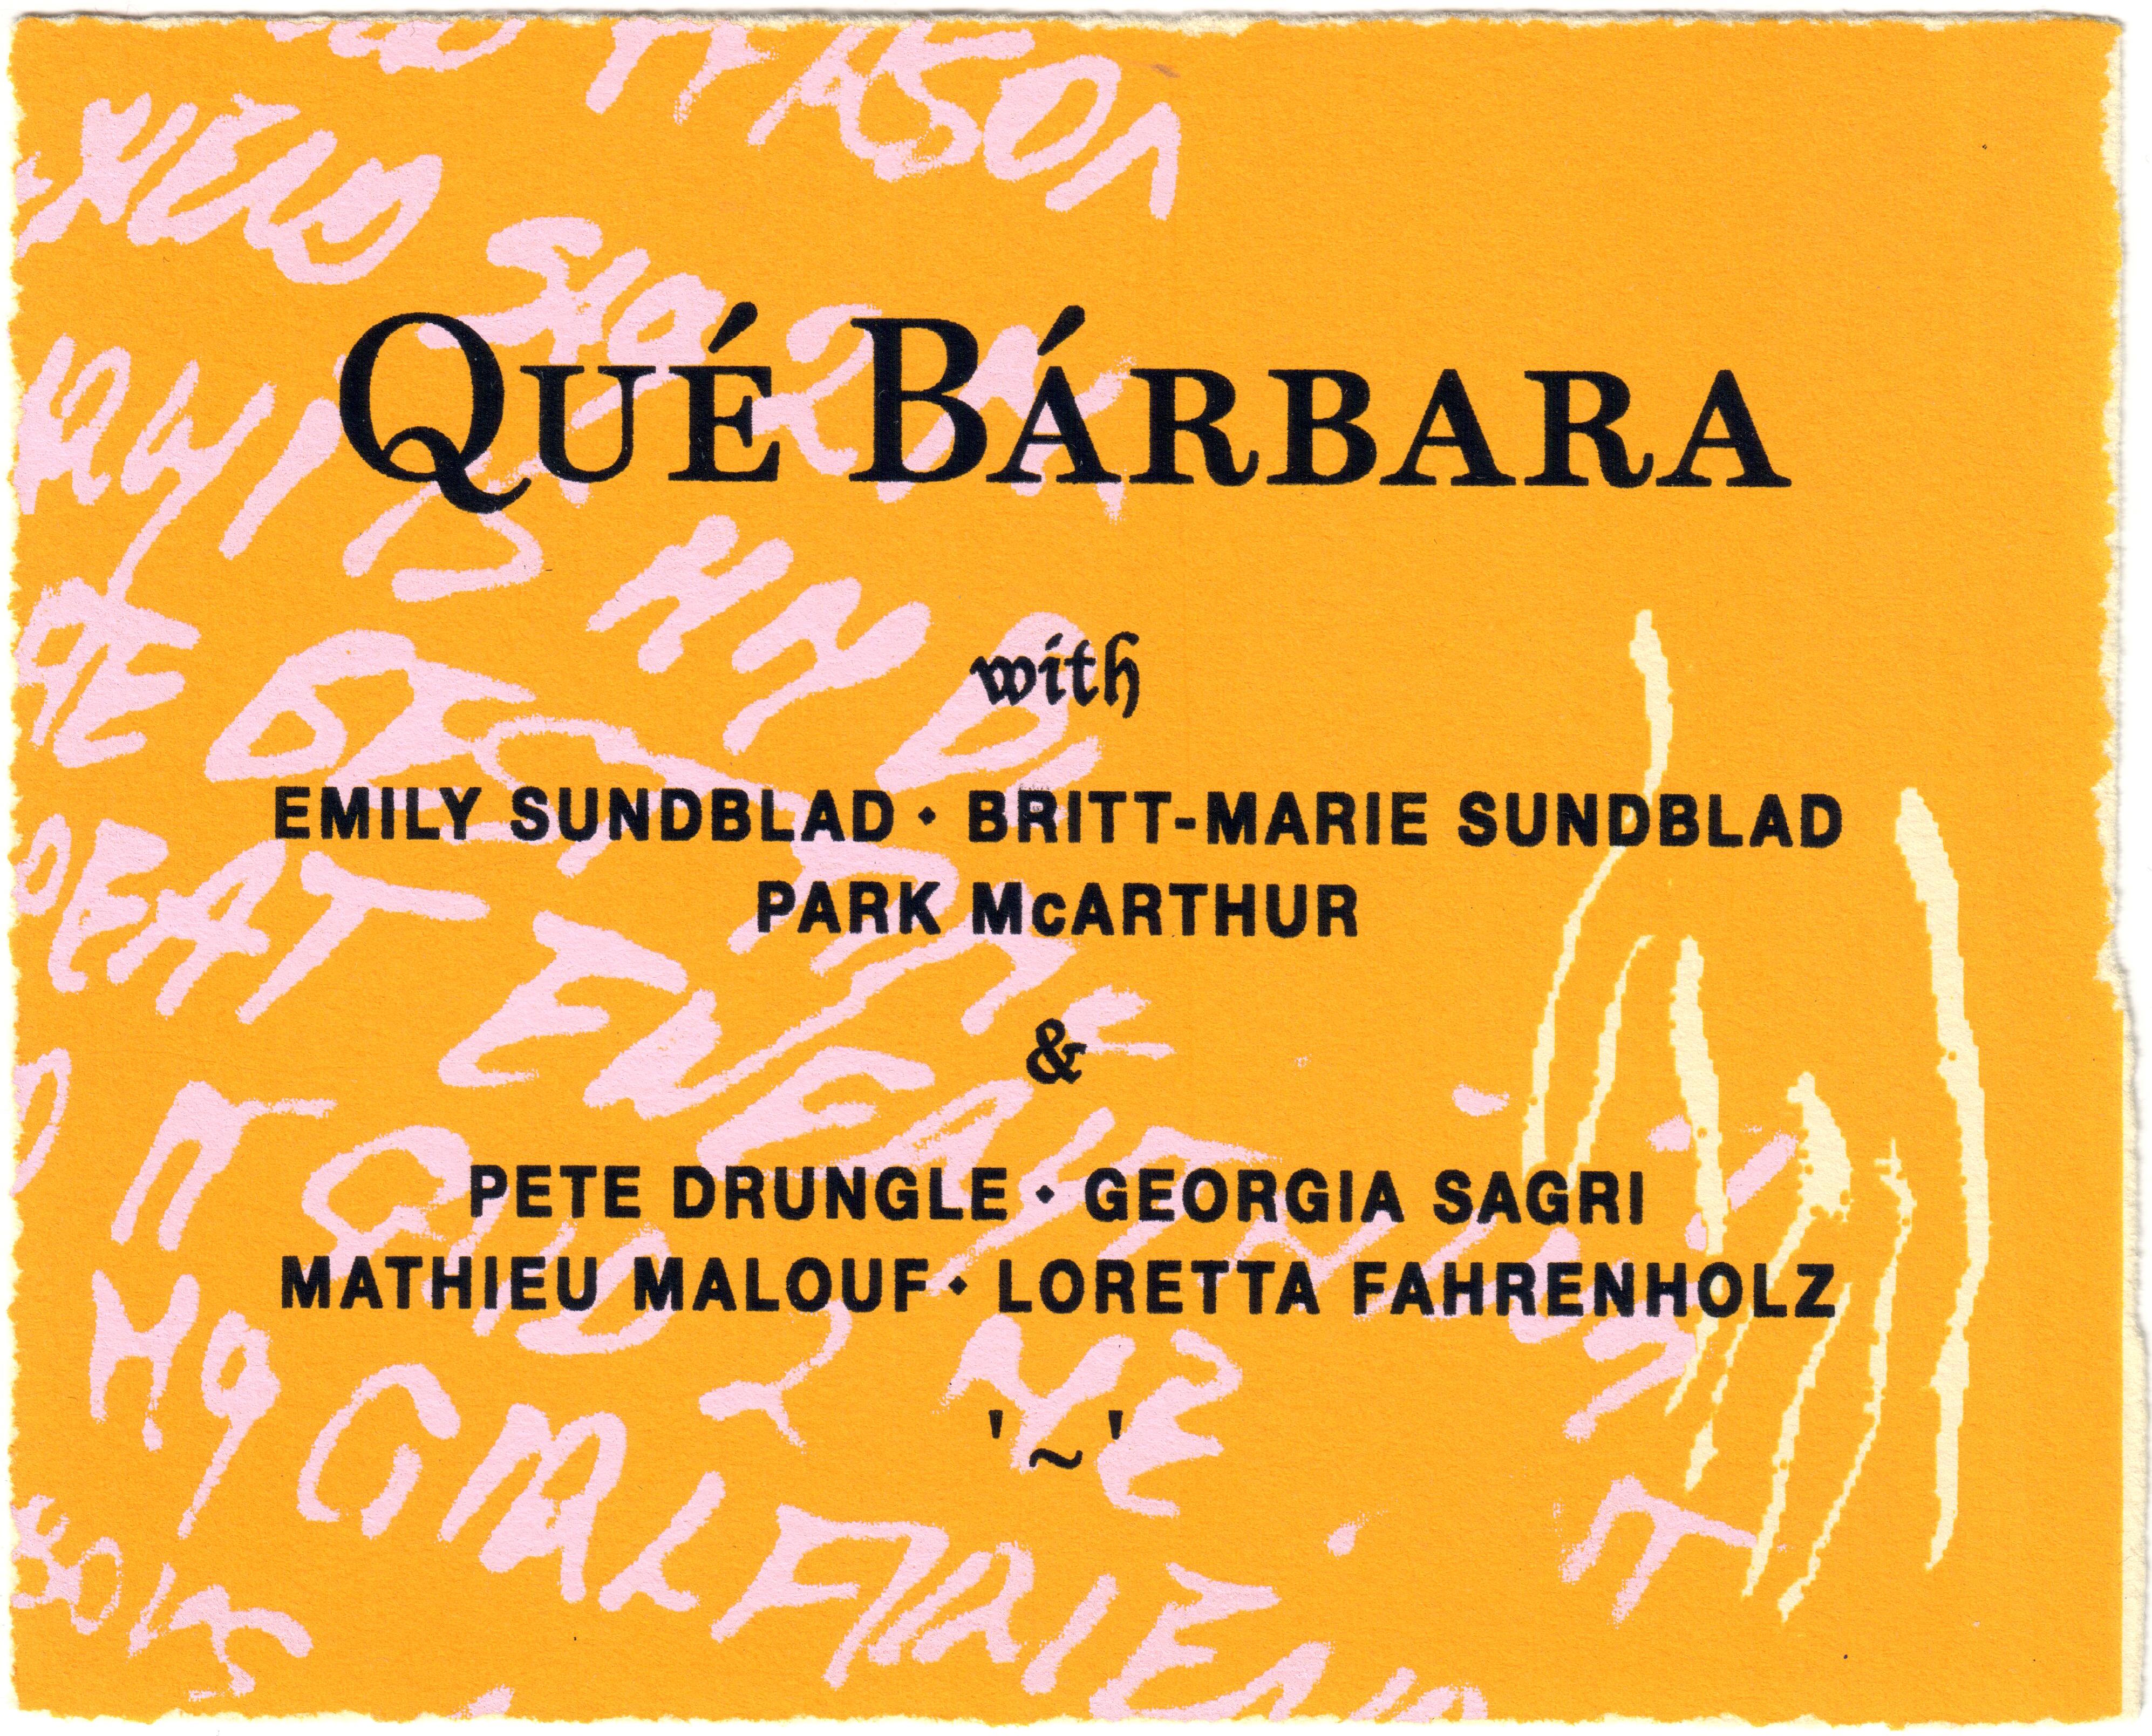 yellow-orange wine-label inspired poster for Que Barbara